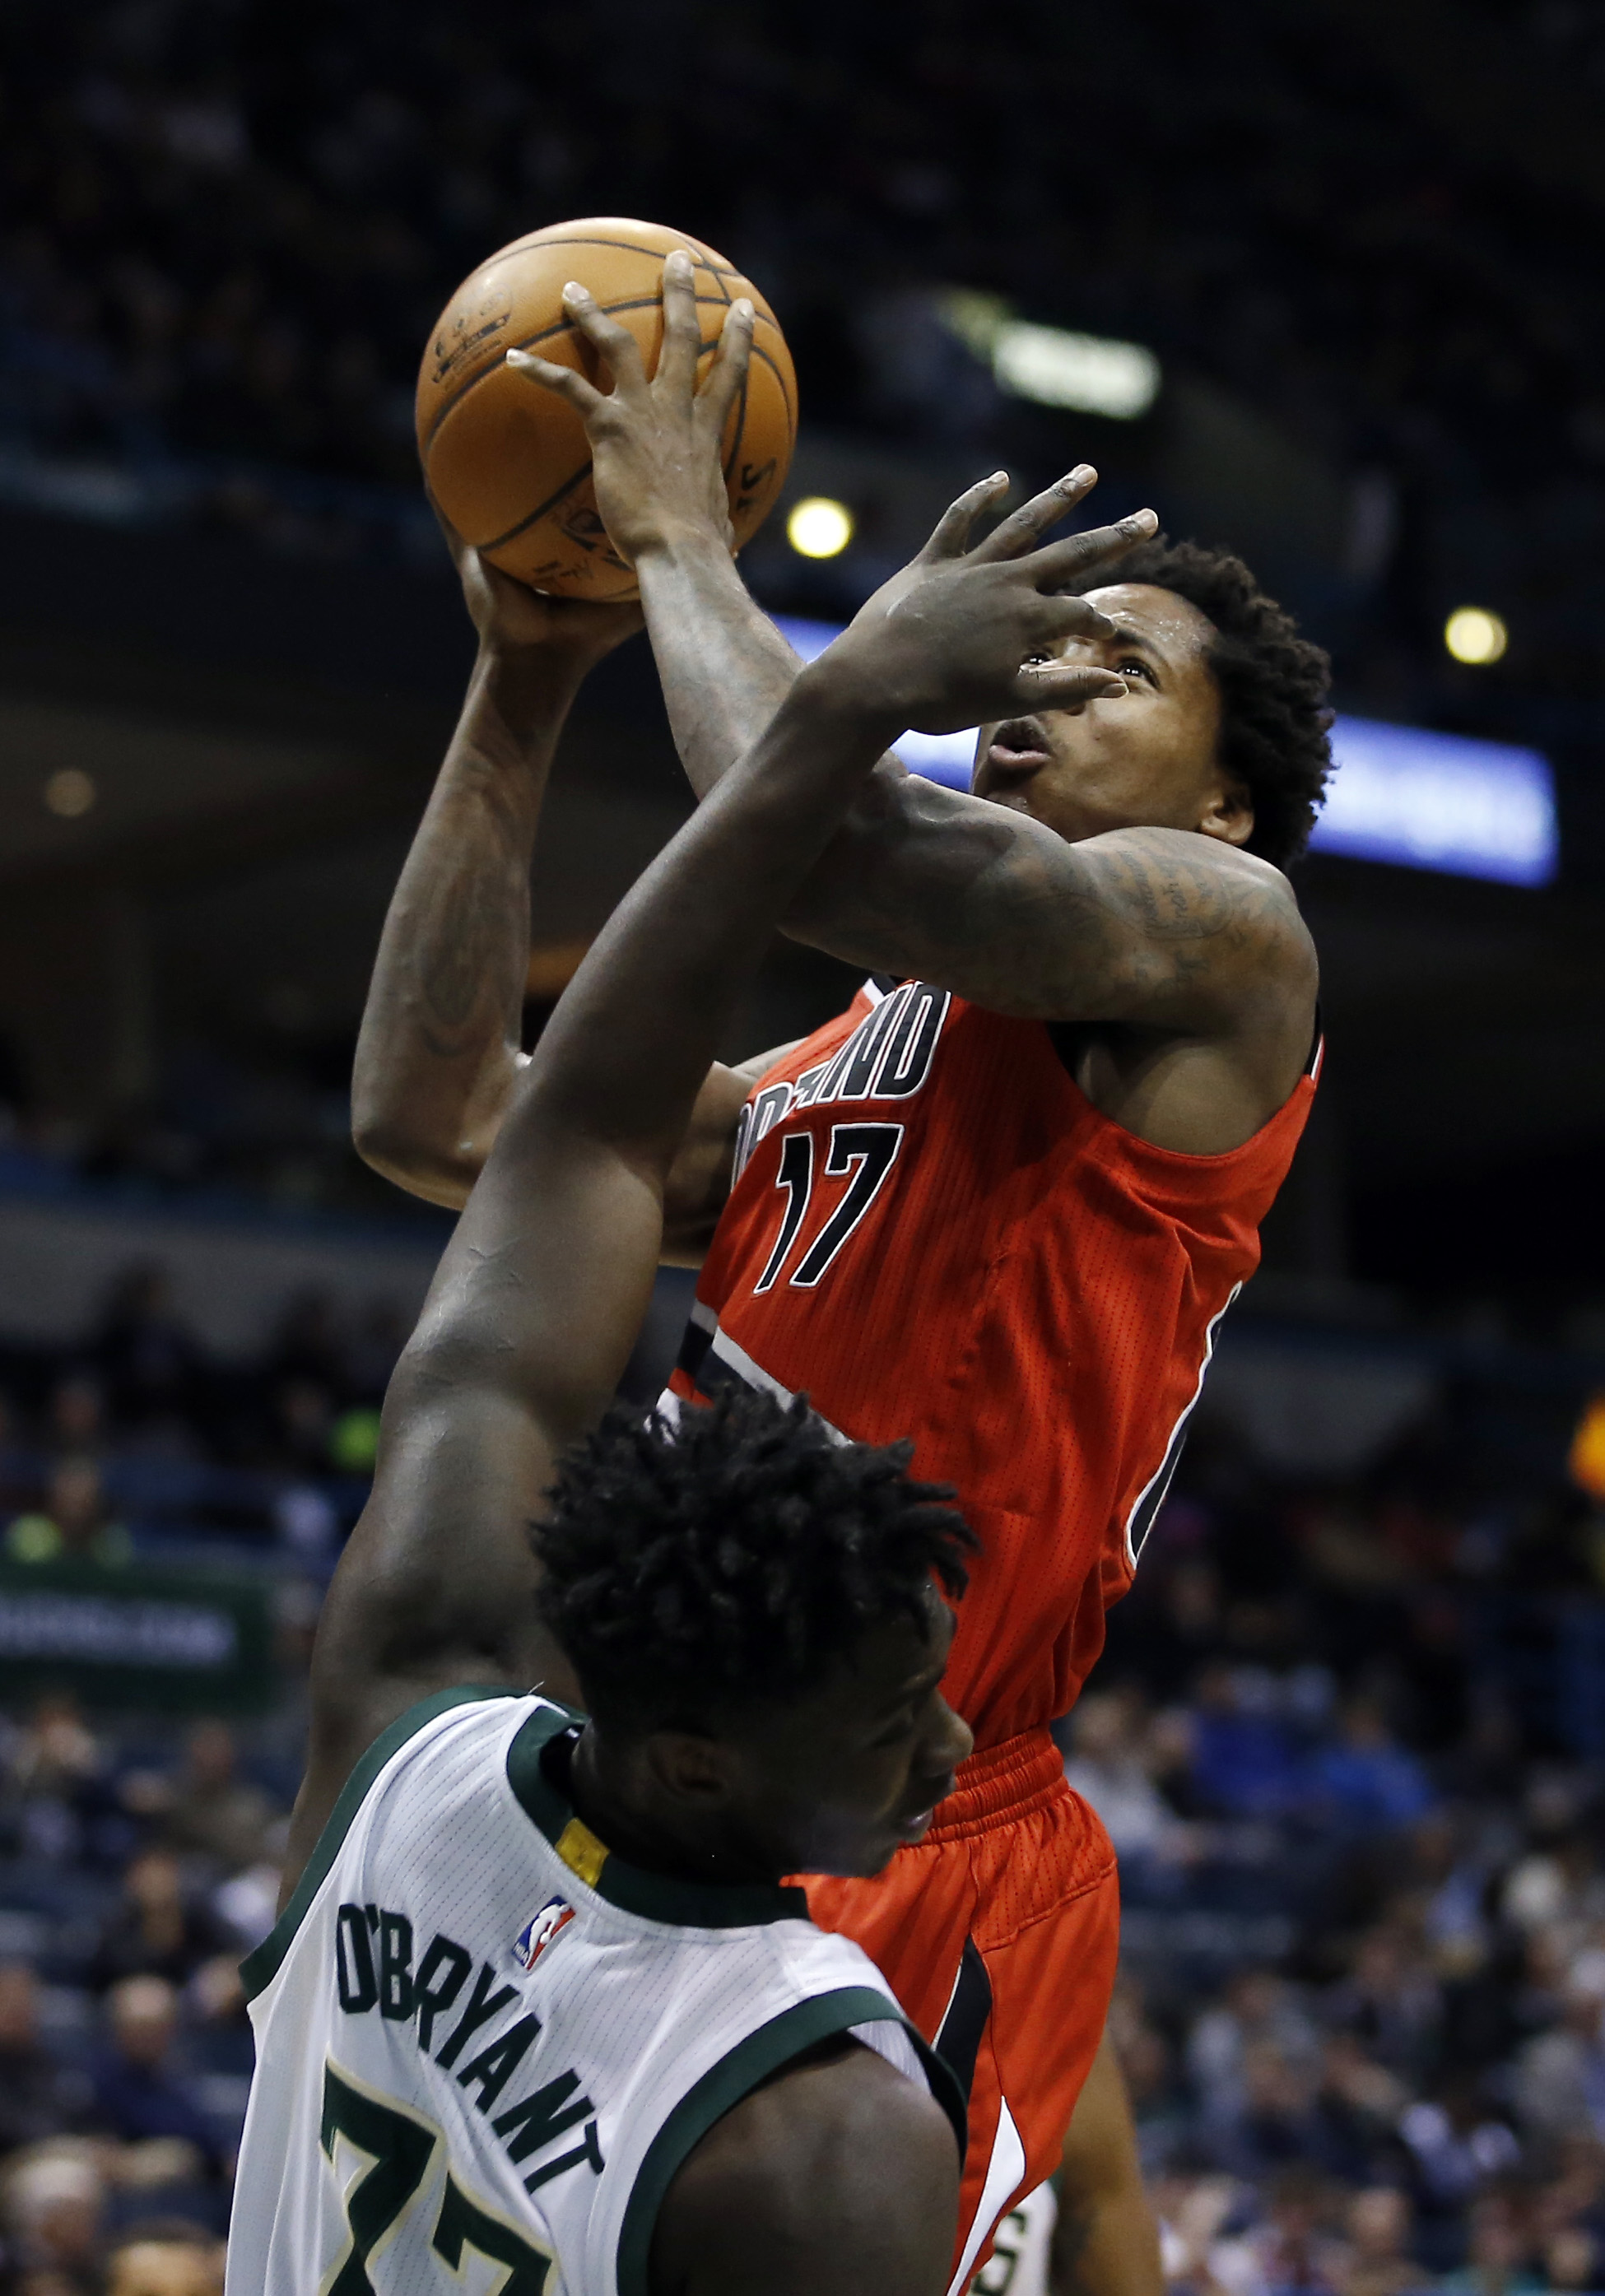 Portland Trail Blazers' Ed Davis (17) is fouled by Milwaukee Bucks' Johnny O'Bryant III as he shoots during the first half of an NBA basketball game Monday, Dec. 7, 2015, in Milwaukee.